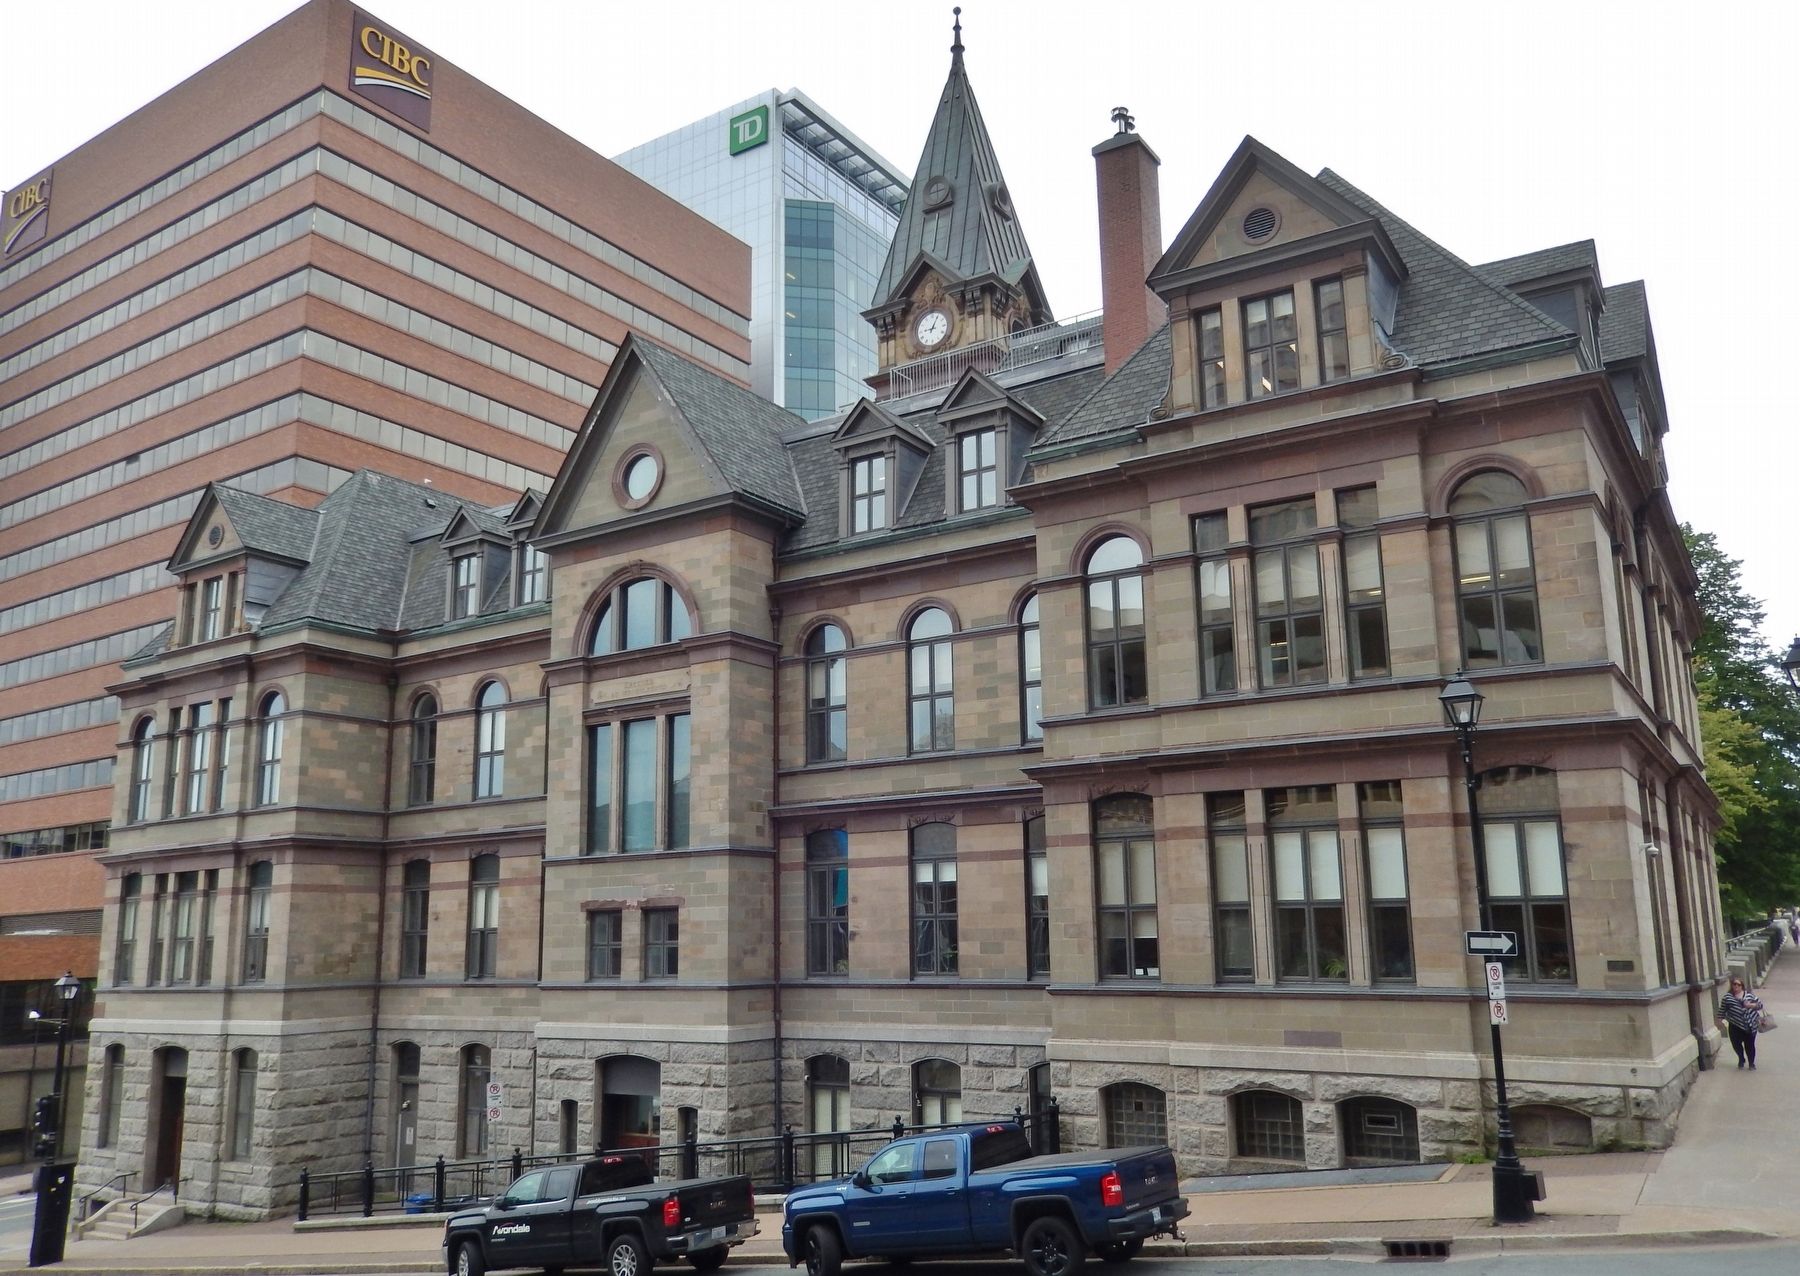 Halifax City Hall (<i>north side • view from near marker</i>) image. Click for full size.